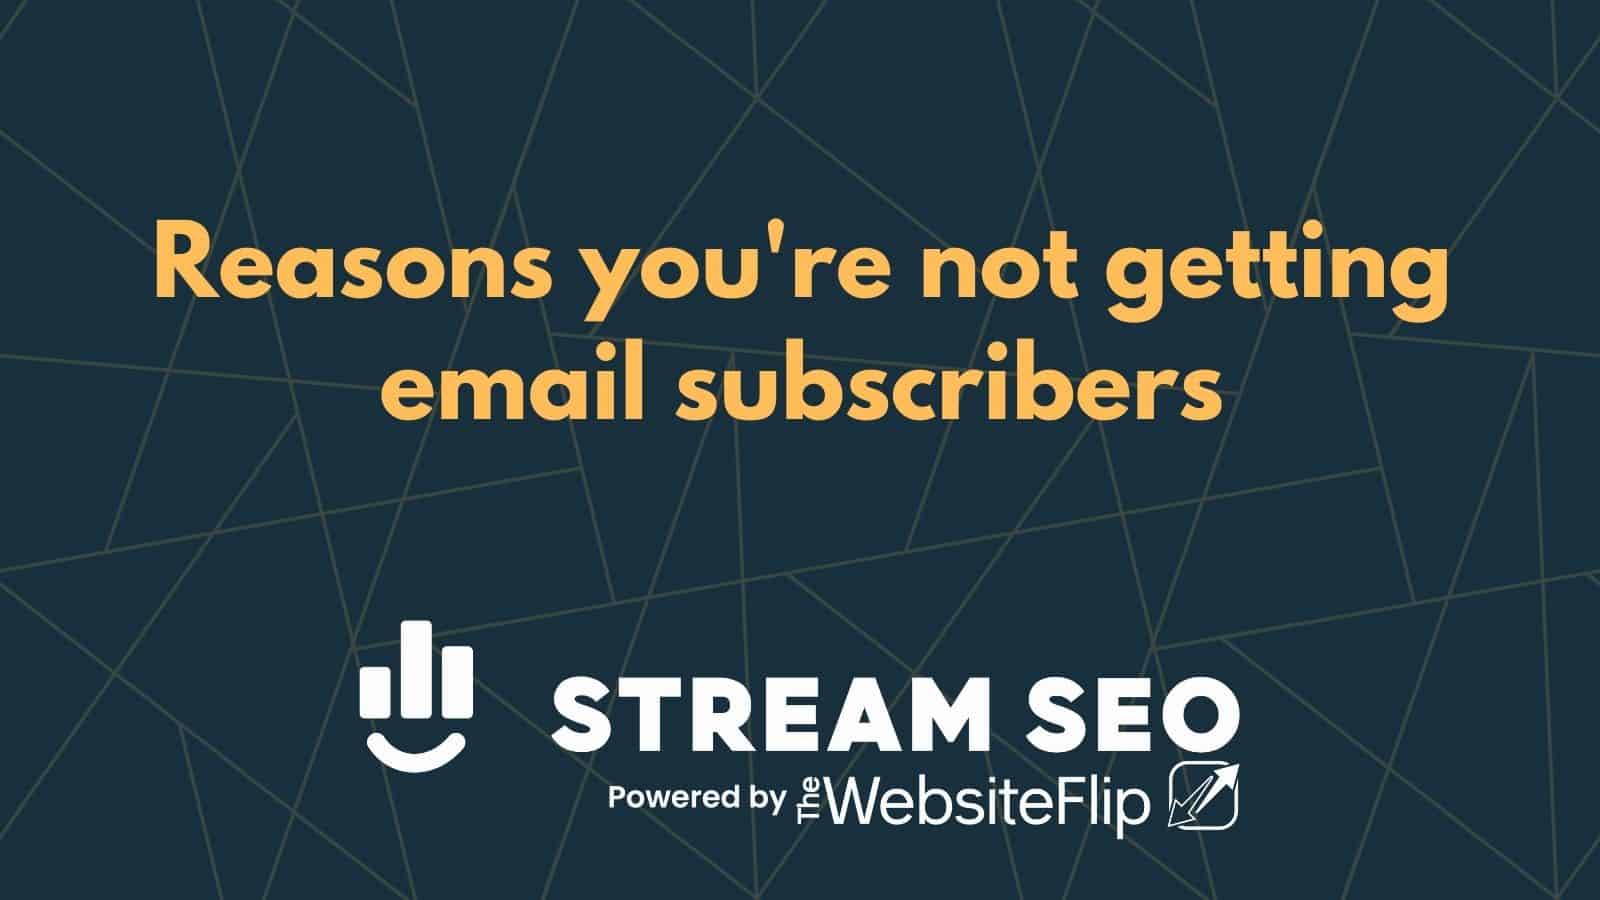 9 Reasons you’re not getting email subscribers